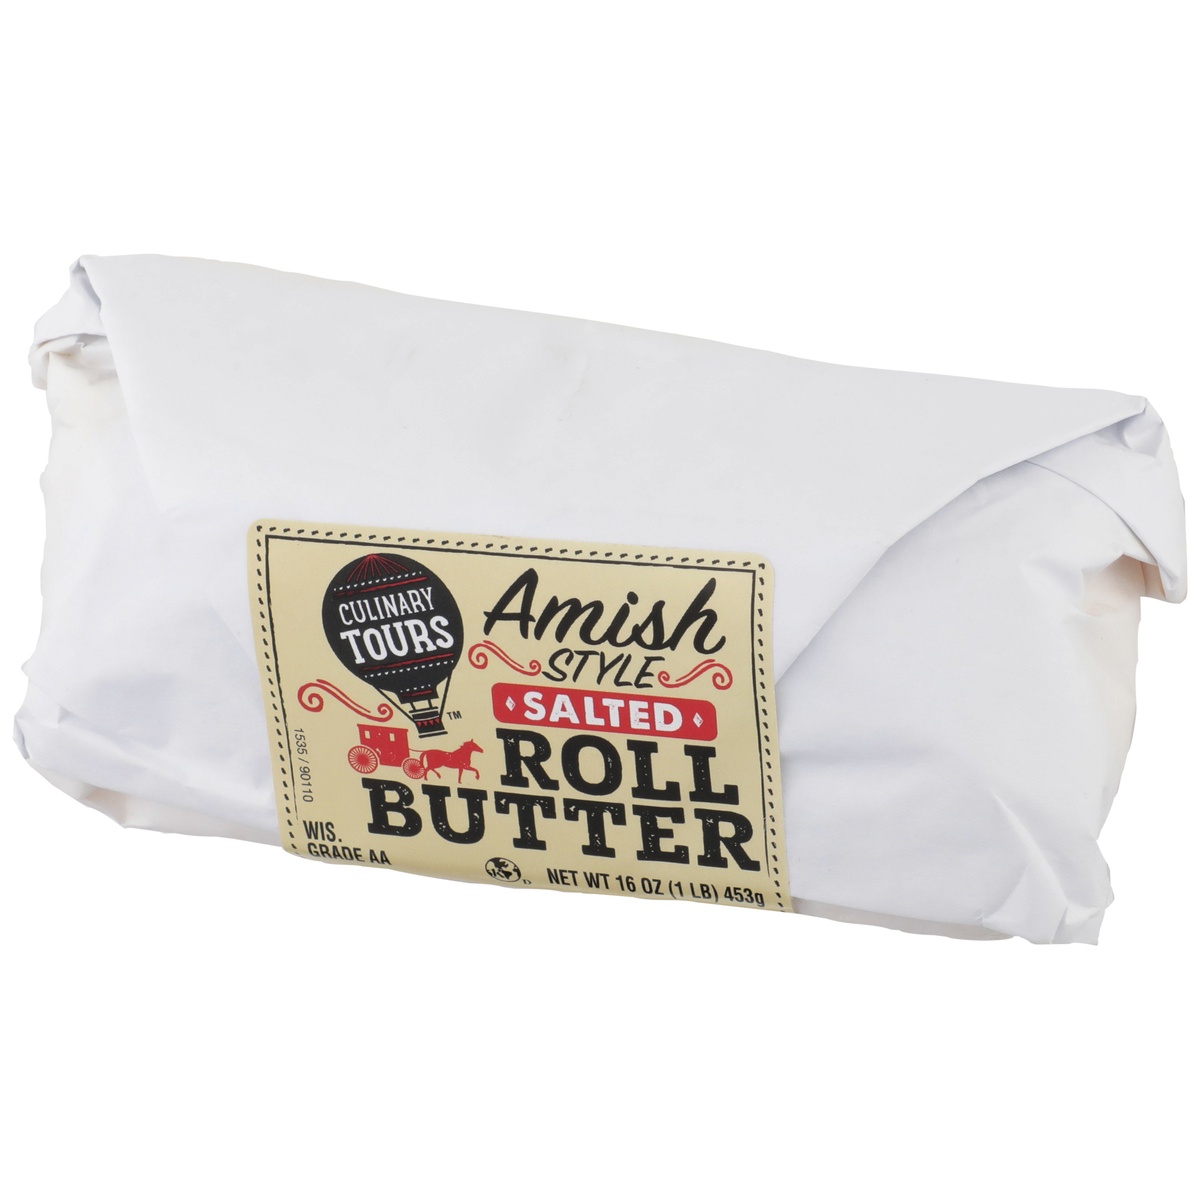 slide 3 of 10, Culinary Tours Salted Amish Style Roll Butter, 16 oz